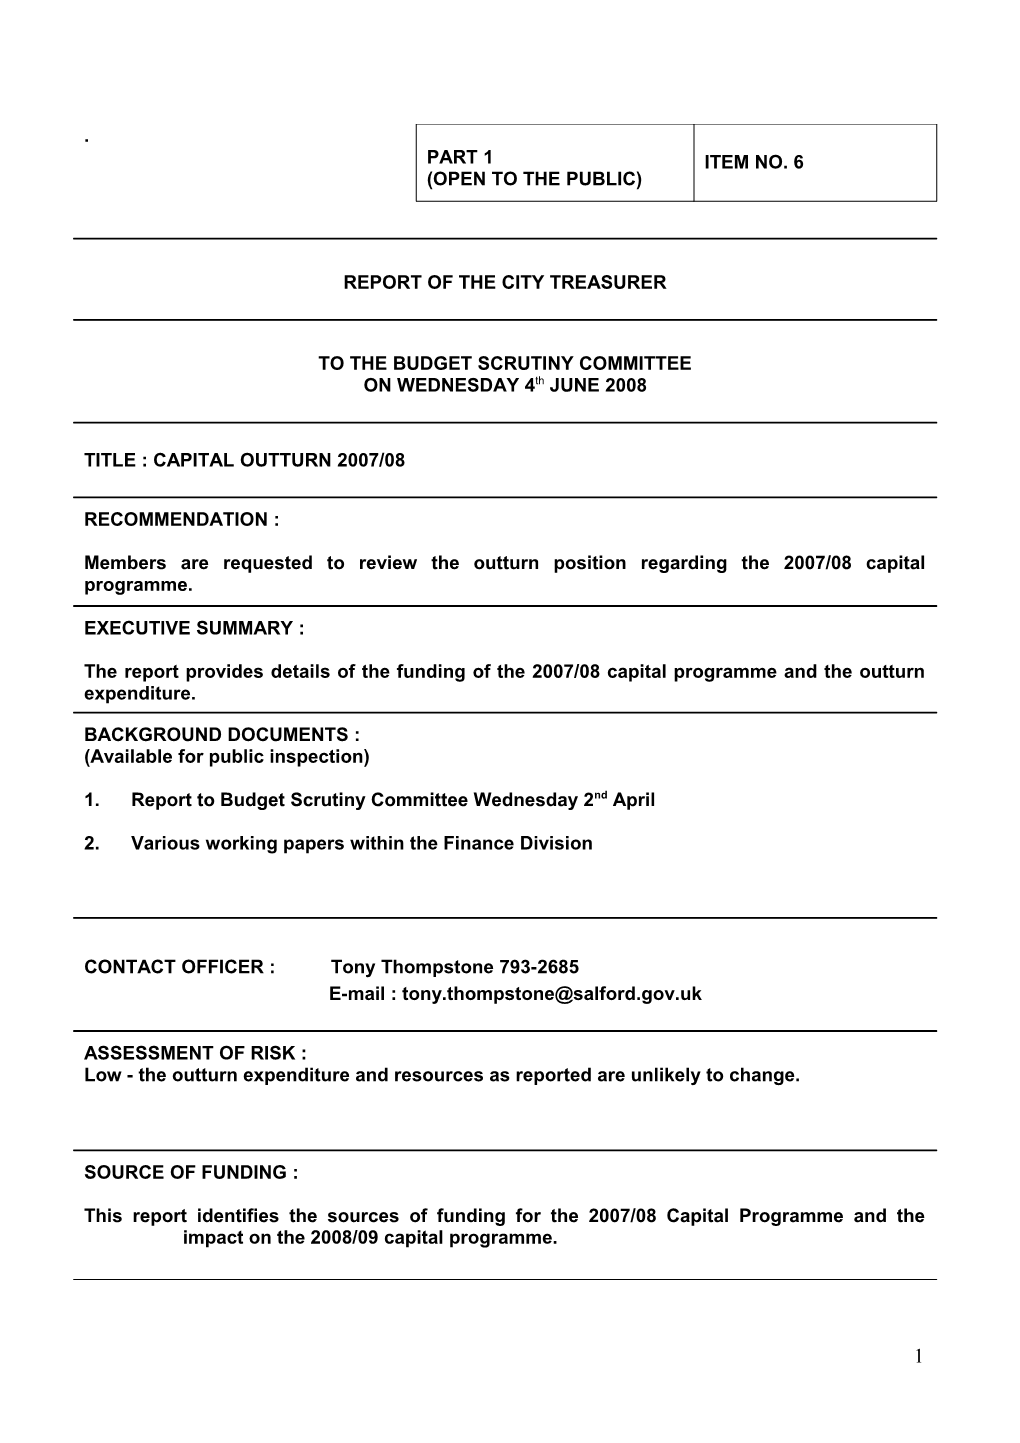 1.2This Report Now Advises Members of the 2007/08 Capital Outturn